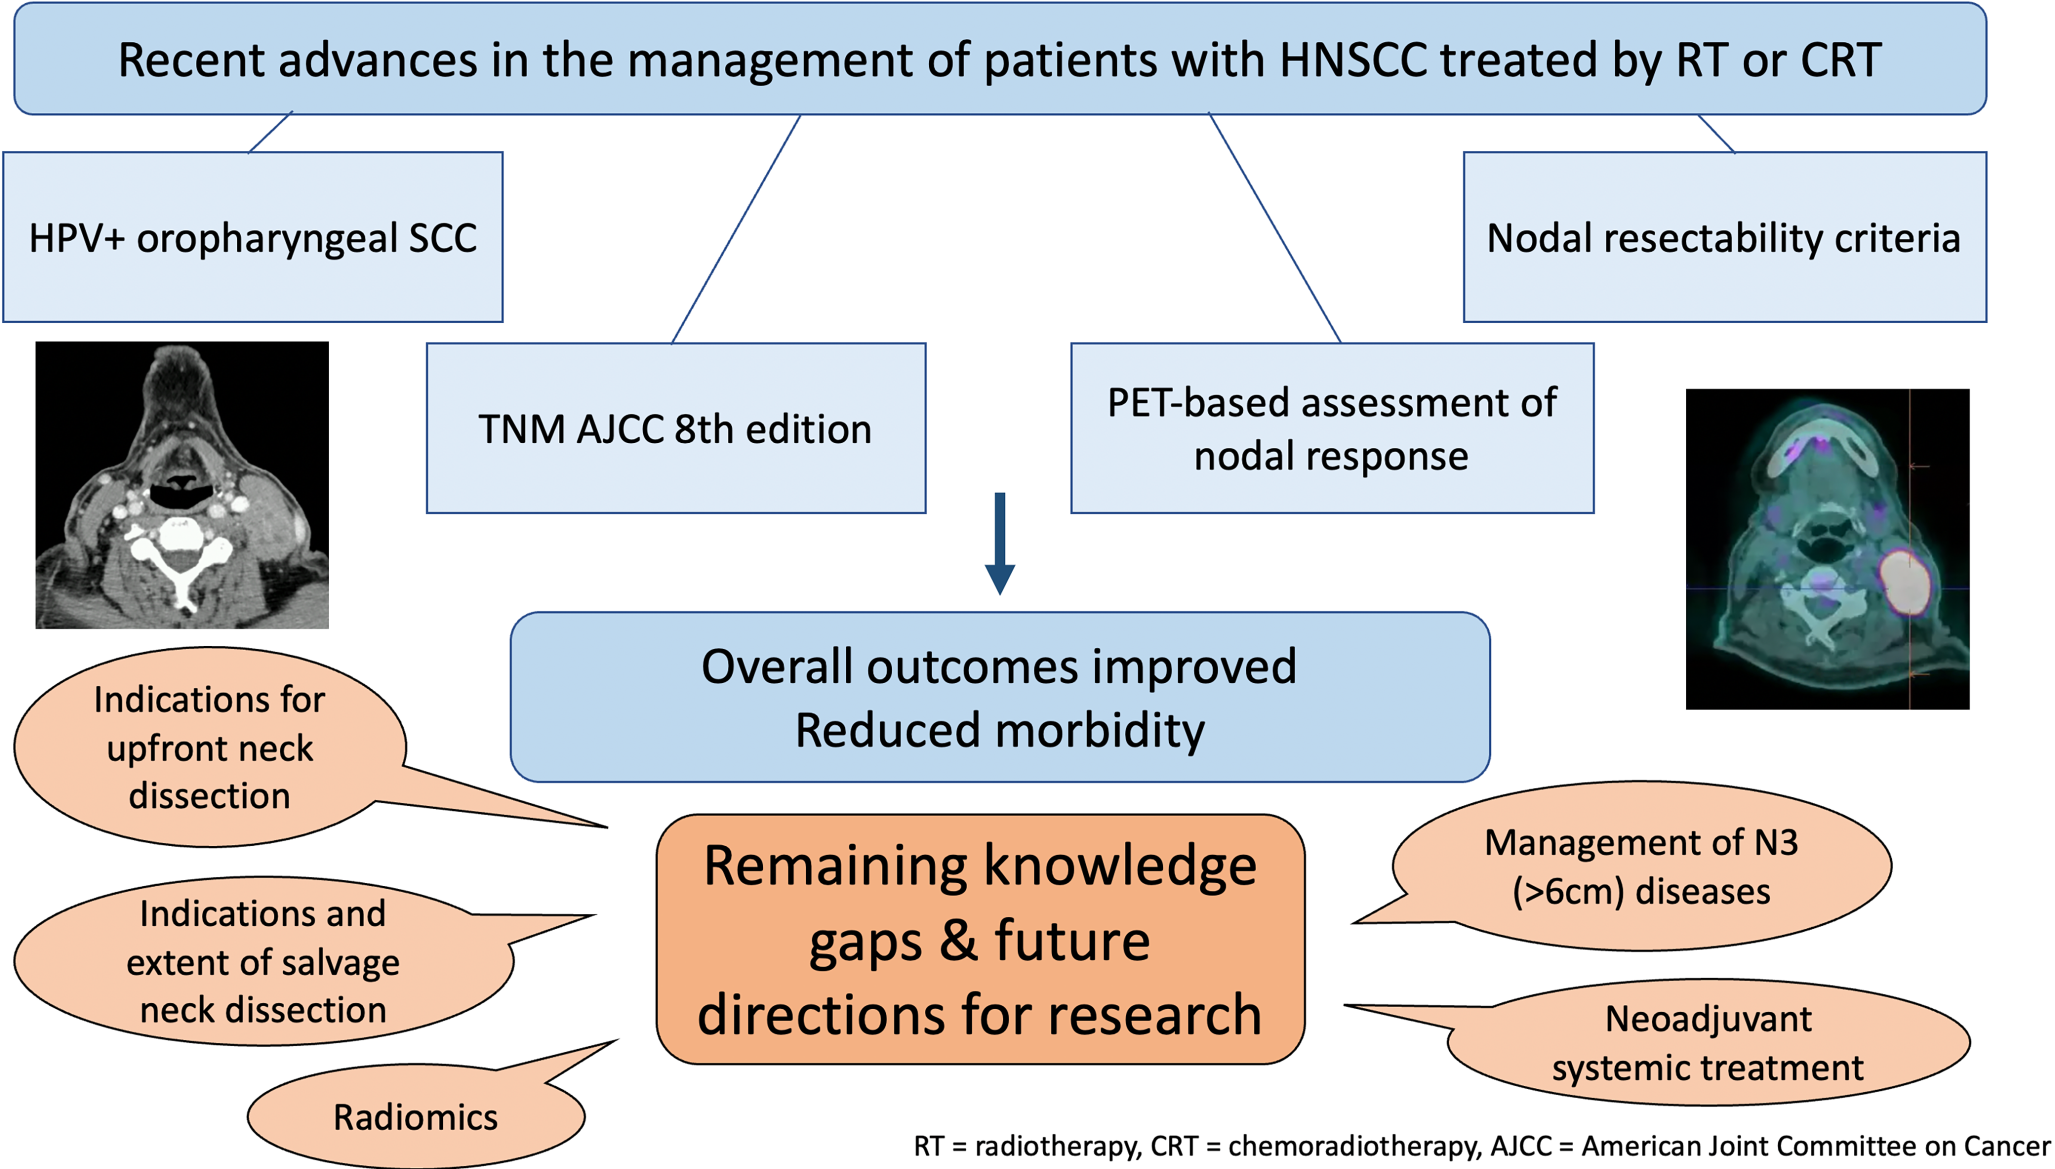 Advances and residual knowledge gaps in the neck management of head and neck squamous cell carcinoma patients with advanced nodal disease undergoing definitive (chemo)radiotherapy for their primary